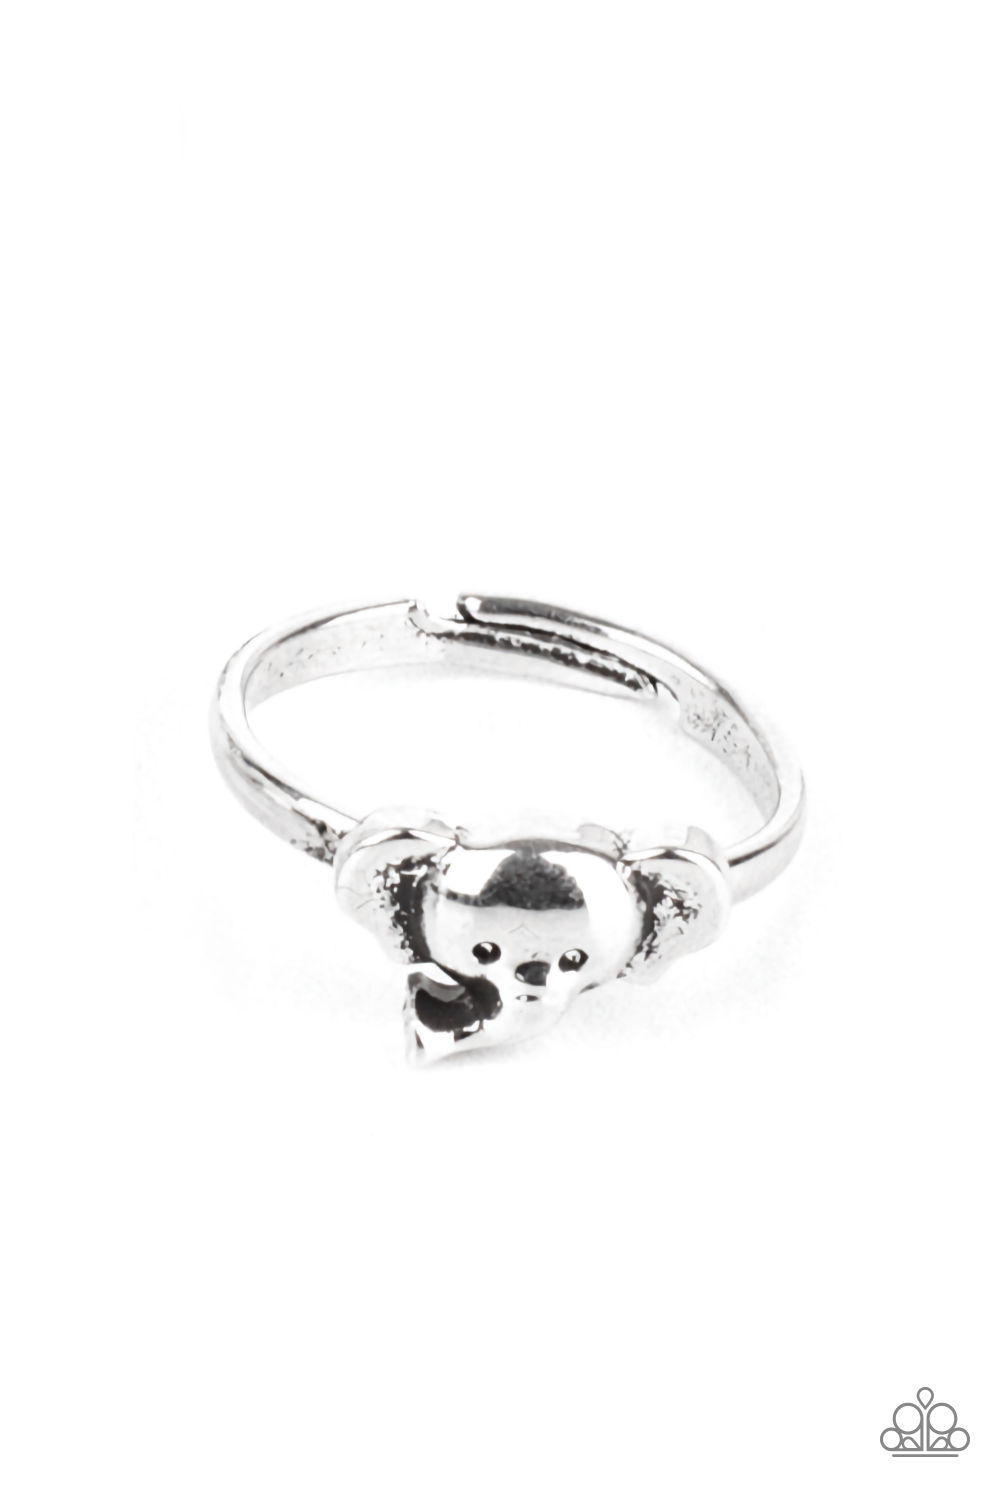 Ring - Starlet Shimmer Silver Zoo - Elephant